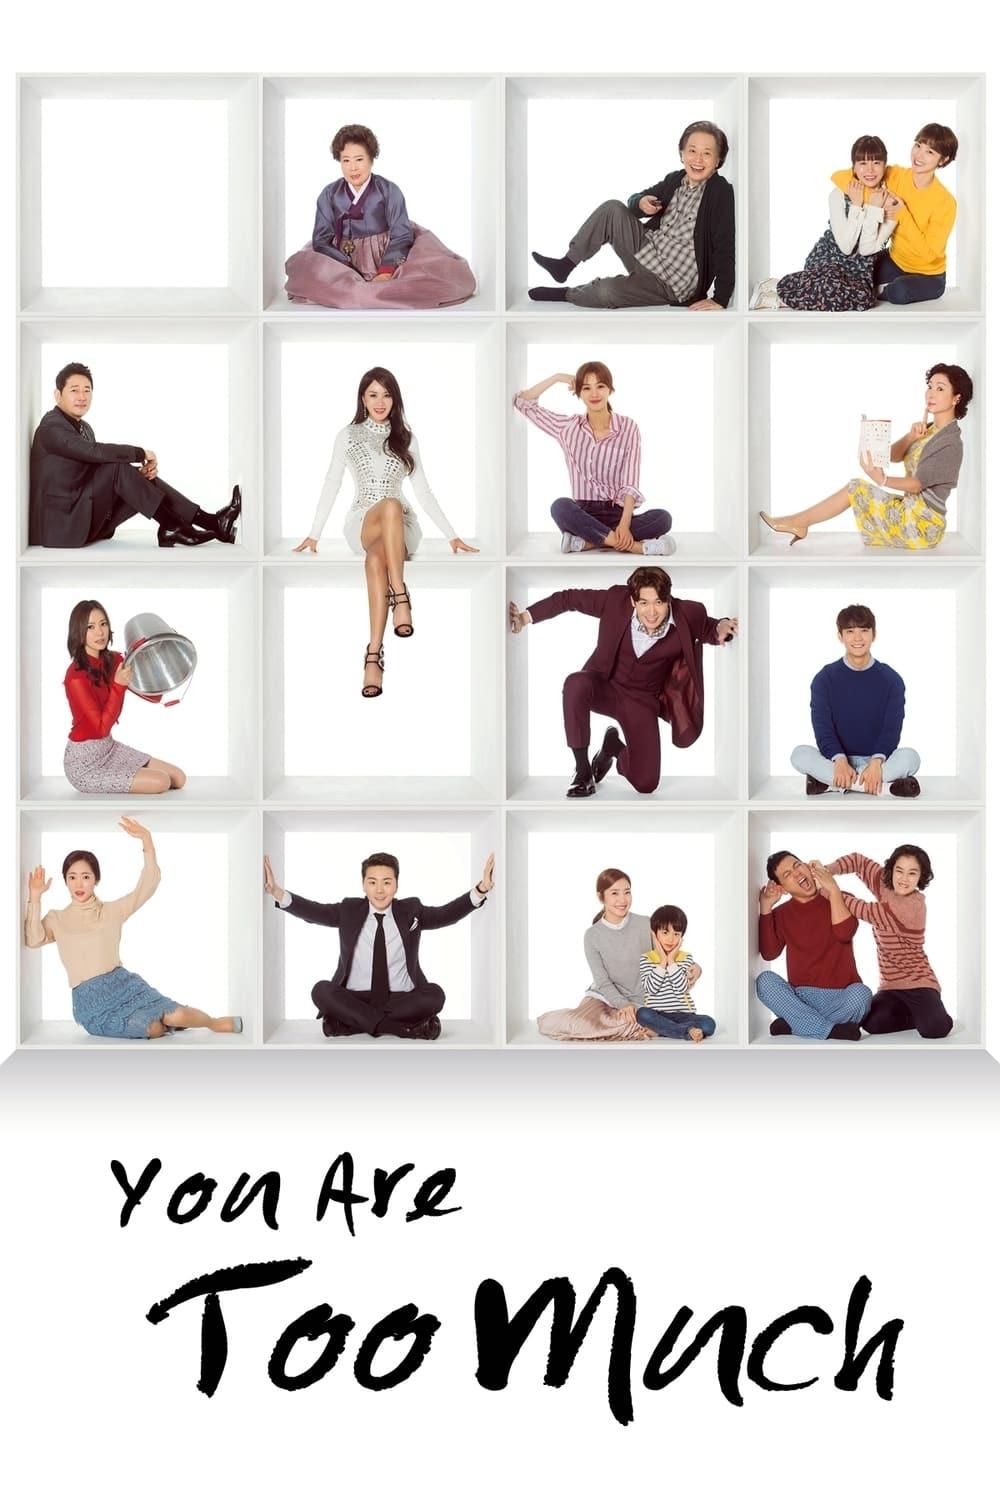 You Are Too Much poster